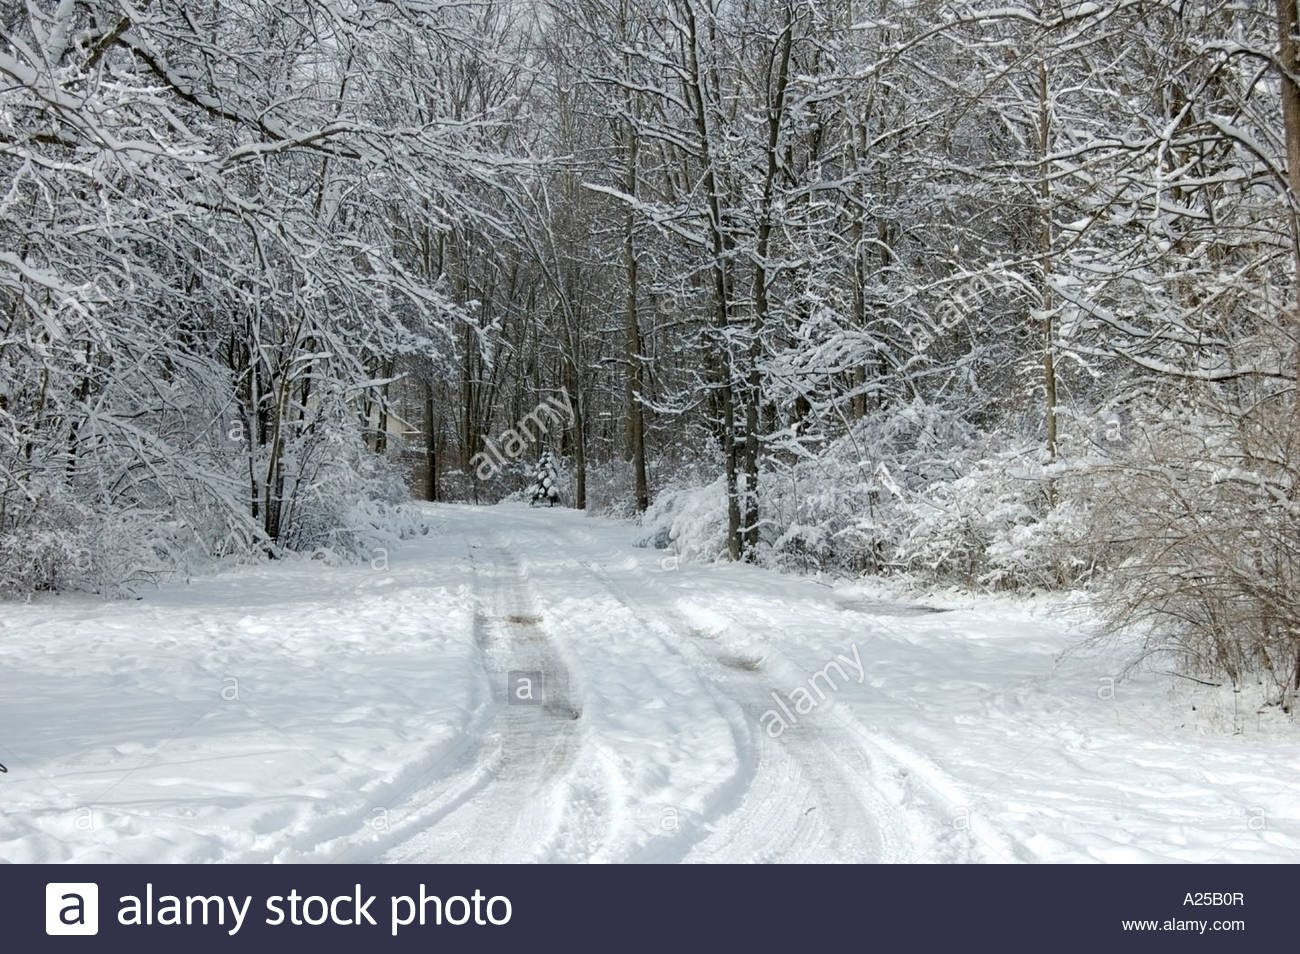 Winter Scene Of Driveway Leading To Home In The Background Stock